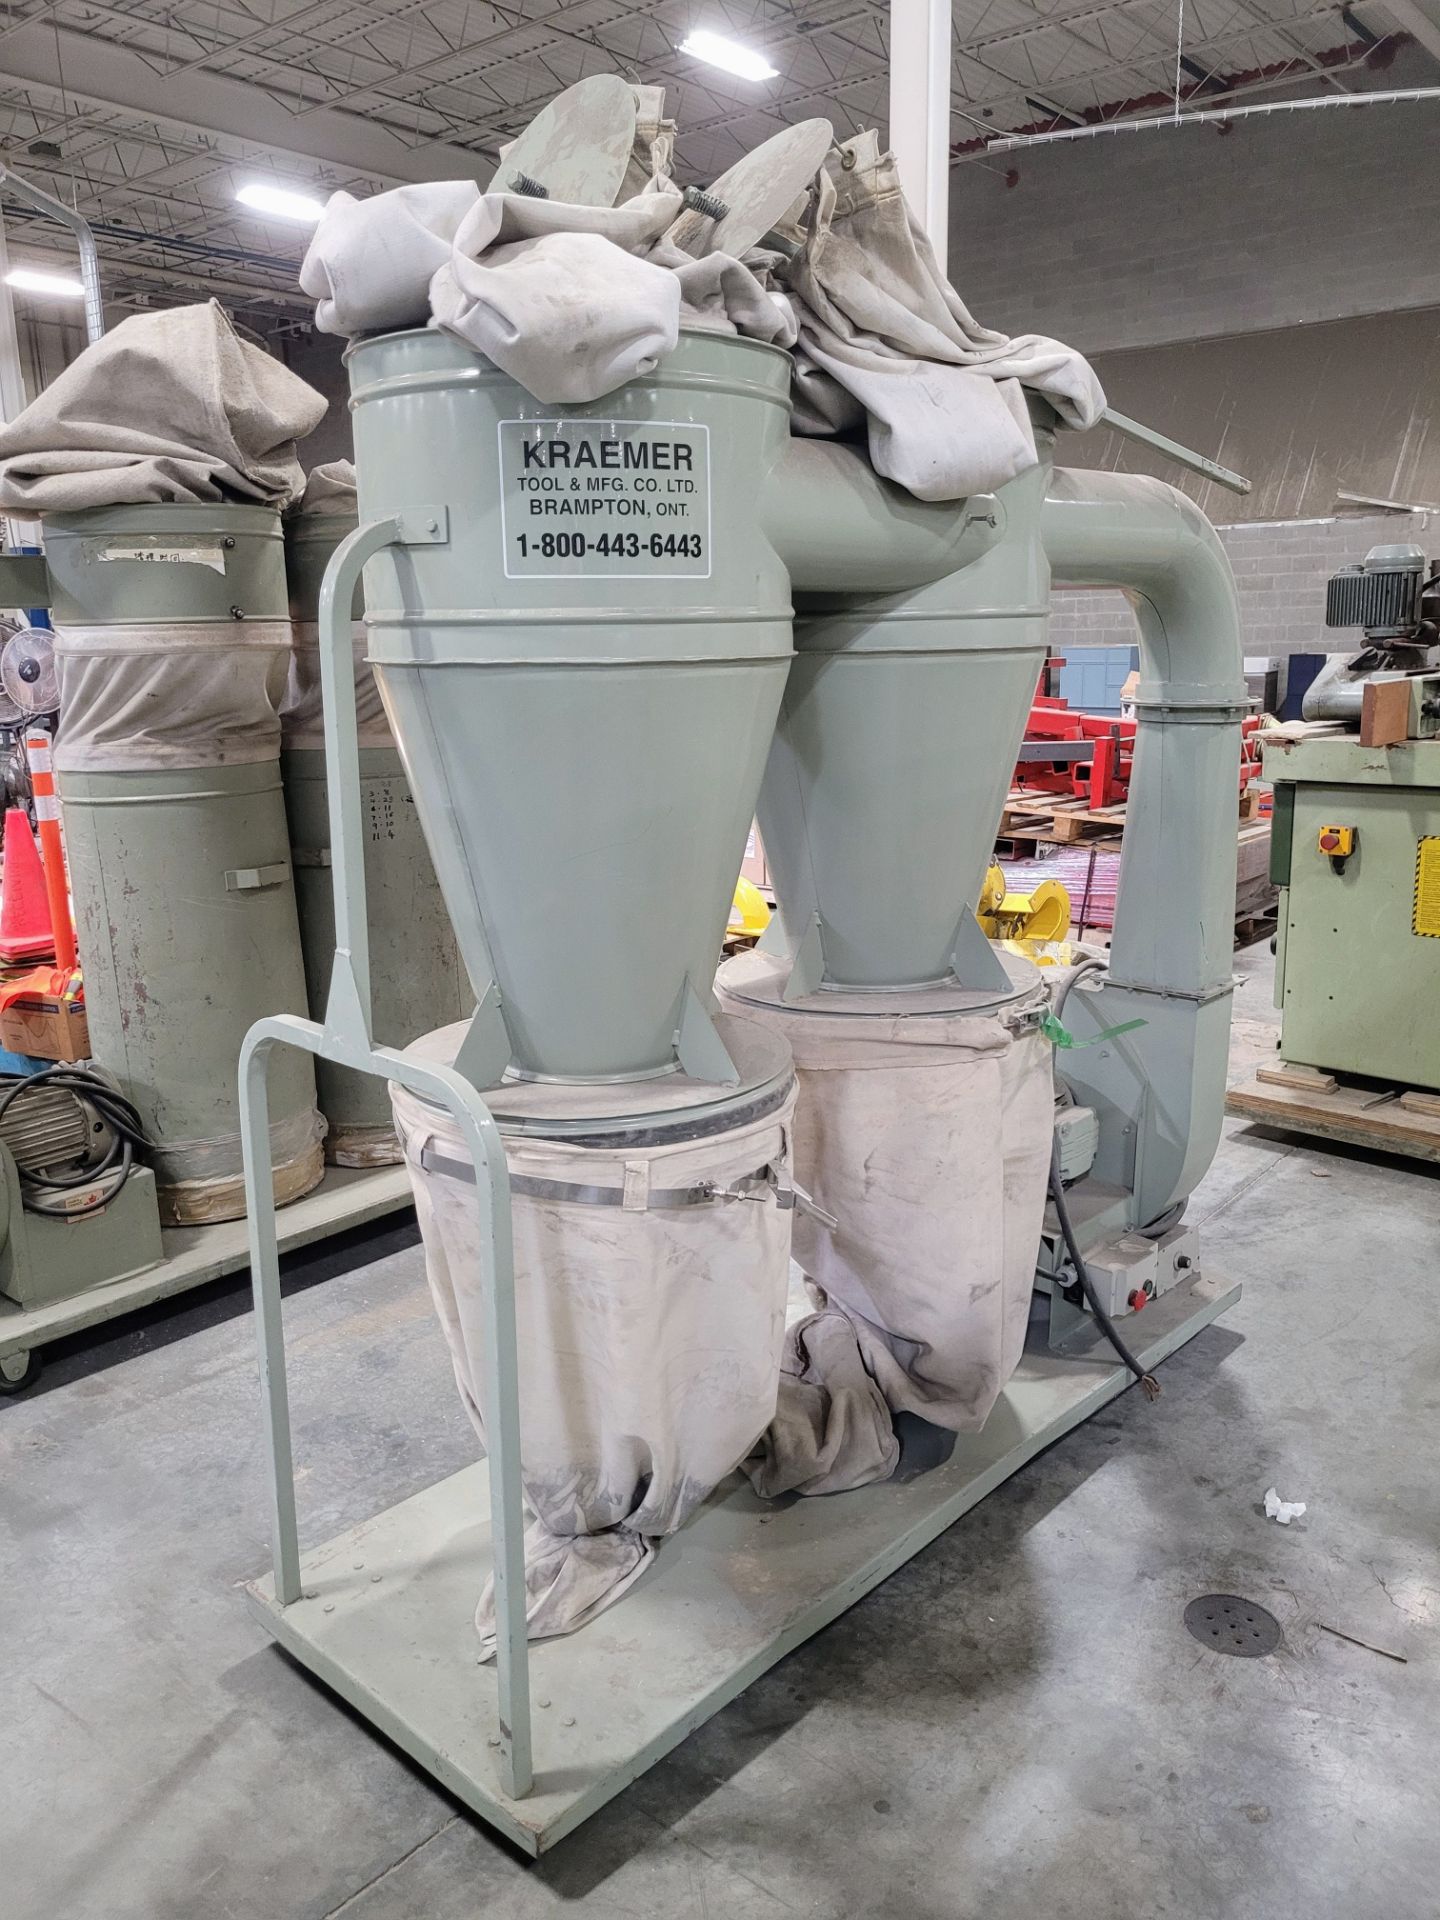 KRAEMER, KTM-S5212- CYN SPECIAL, 5HP DUAL BAG PORTABLE DUST COLLECTOR - Image 3 of 3